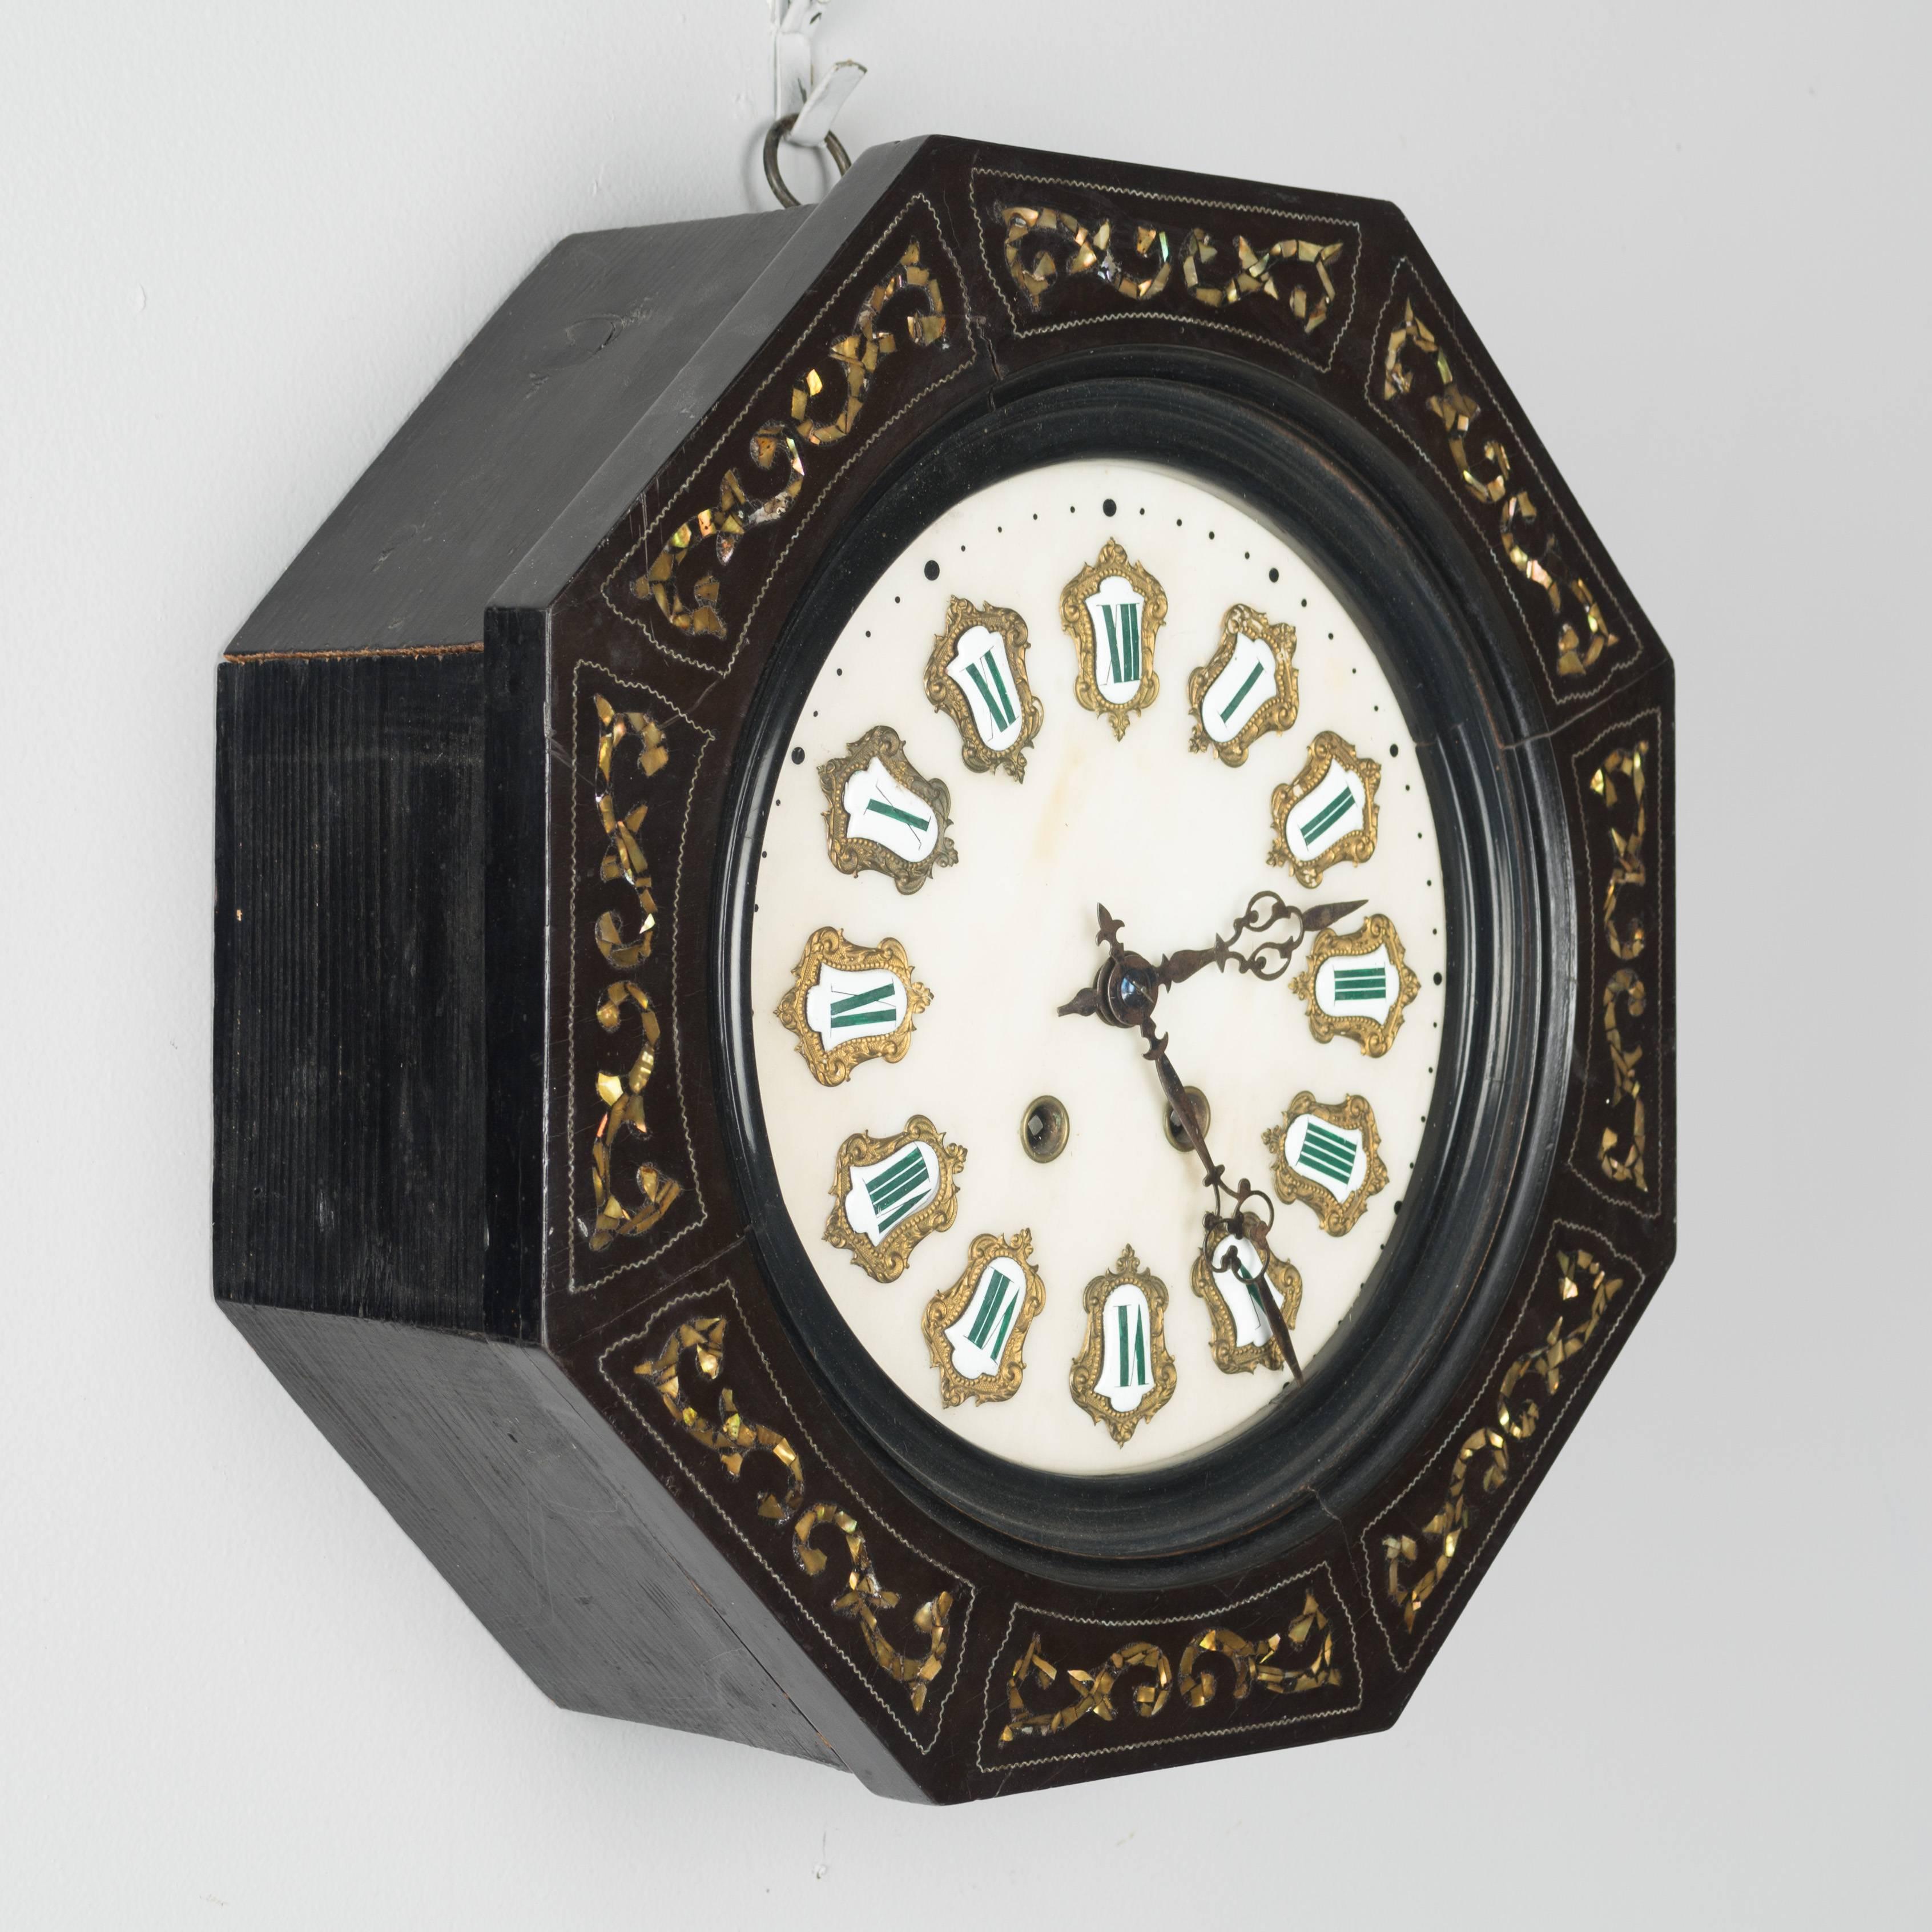 A 19th century French Napoleon III wall clock. Octagonal ebonized wood frame with mother-of-pearl inlay decoration. Marble face inlaid with ceramic roman numerals surrounded by brass decoration. Movement has been cleaned and is in working